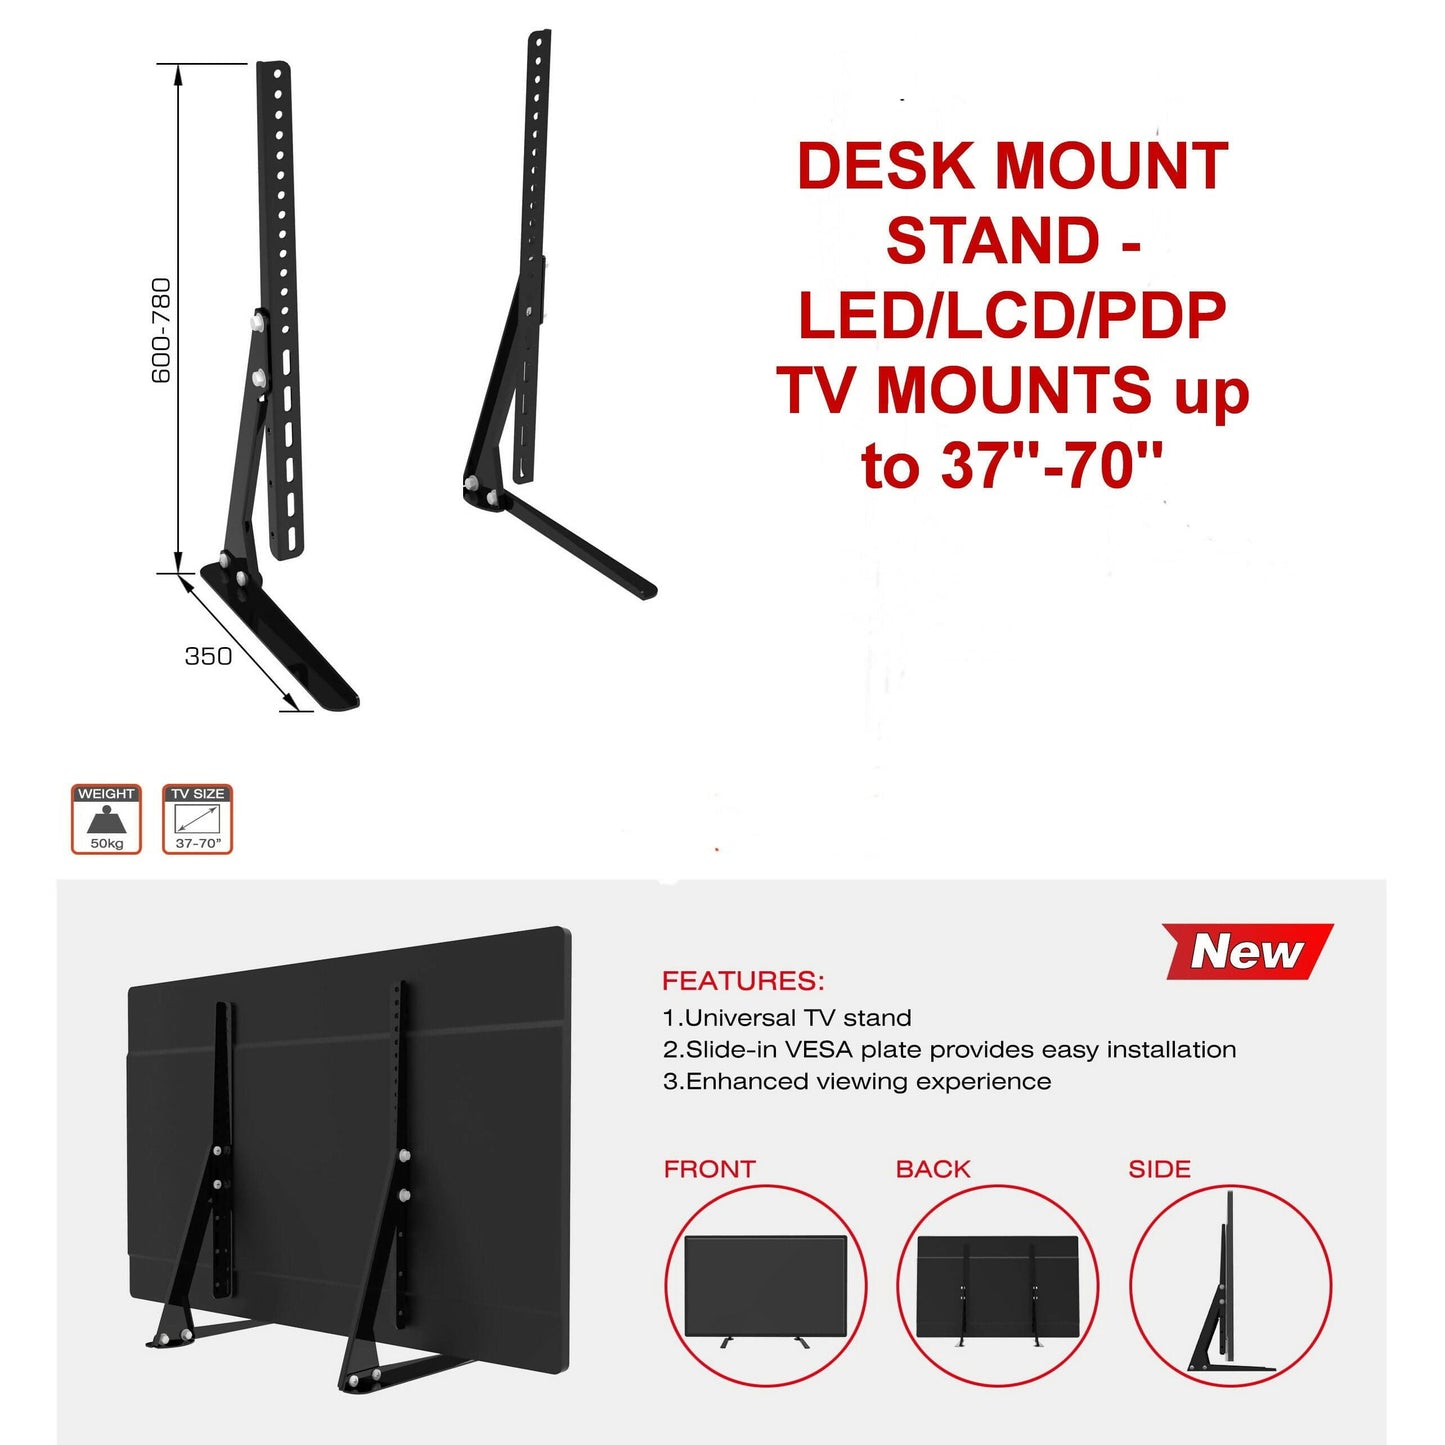 Provideolb Television Stands Conqueror Desk Mount Stand for LED, LCD, Plasma TV 37" To 75" - D500